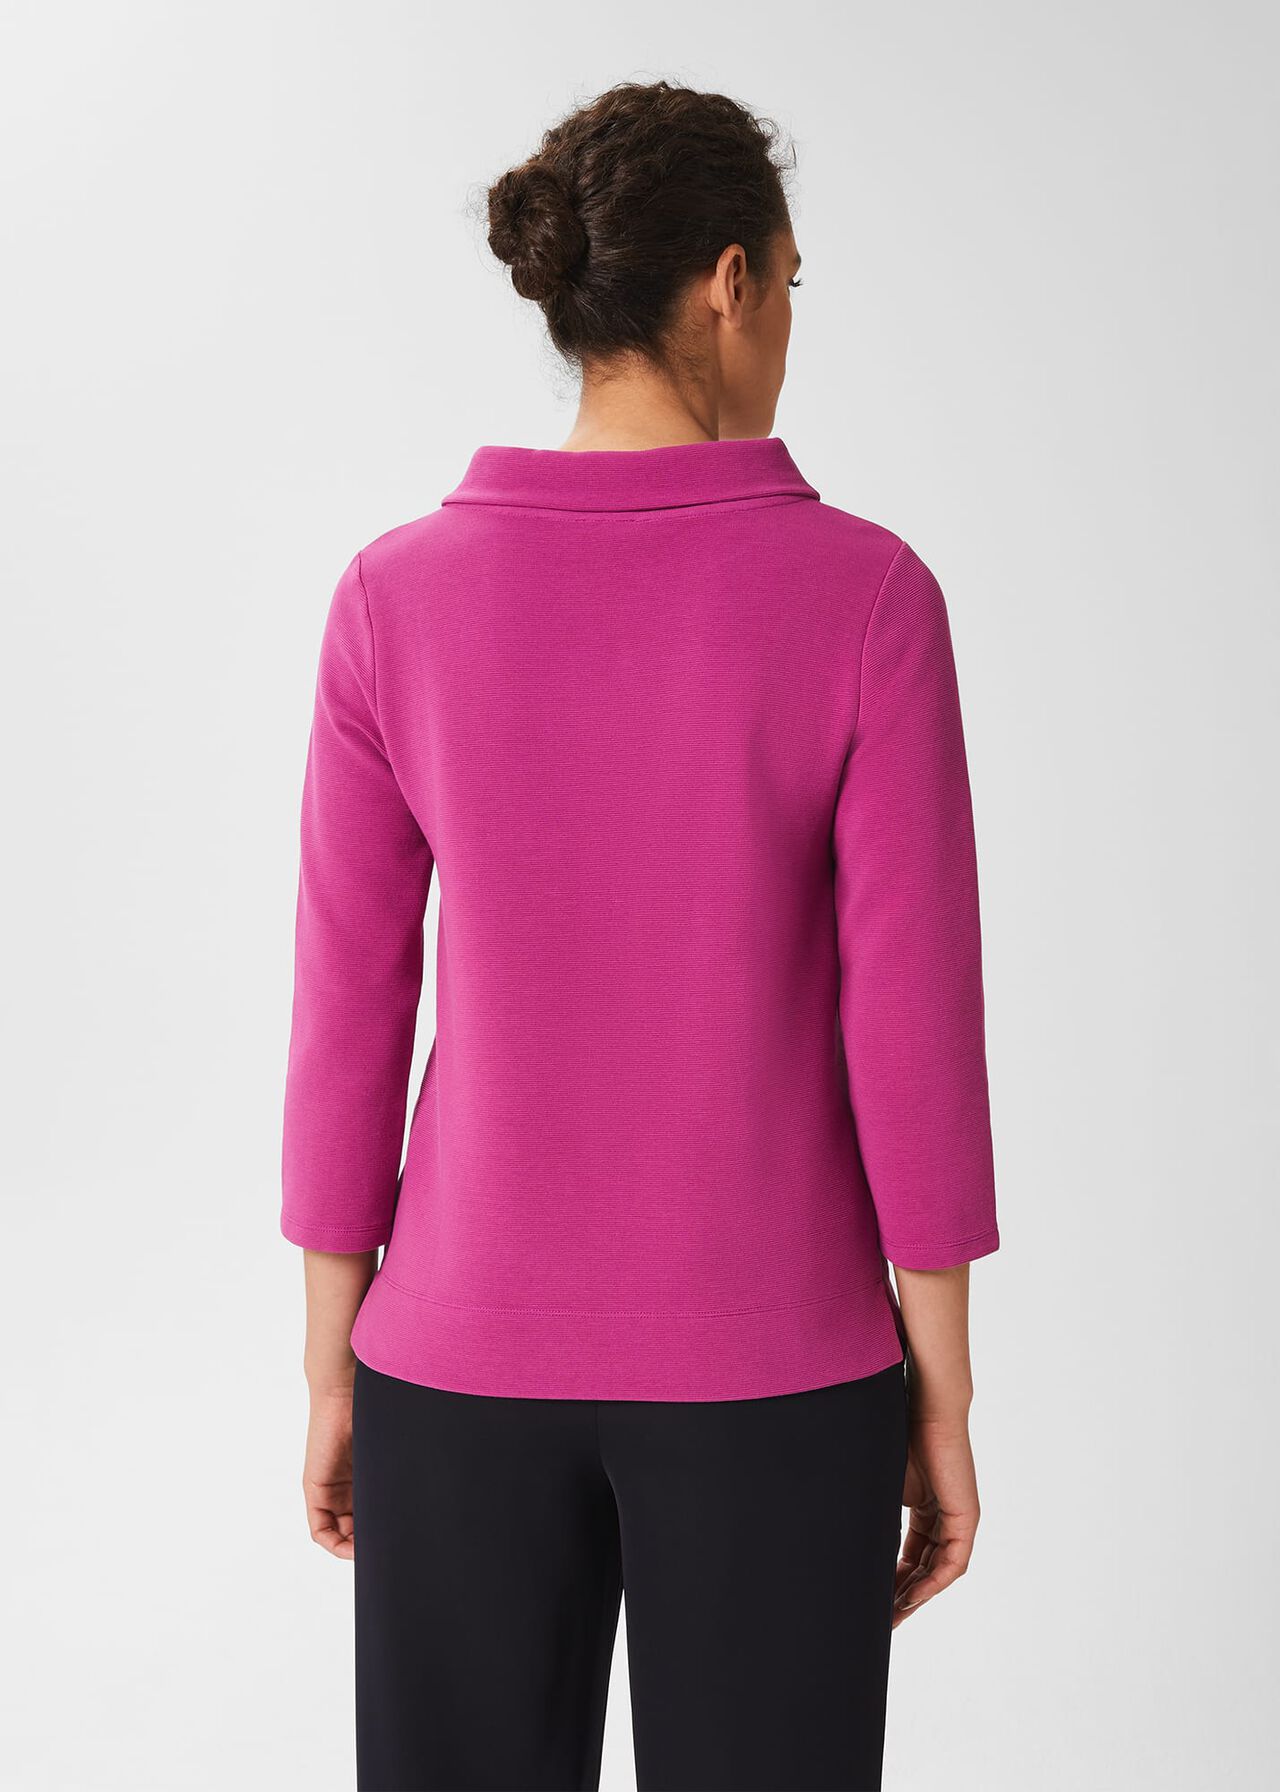 Betsy Textured Top With Cotton , Magenta Pink, hi-res